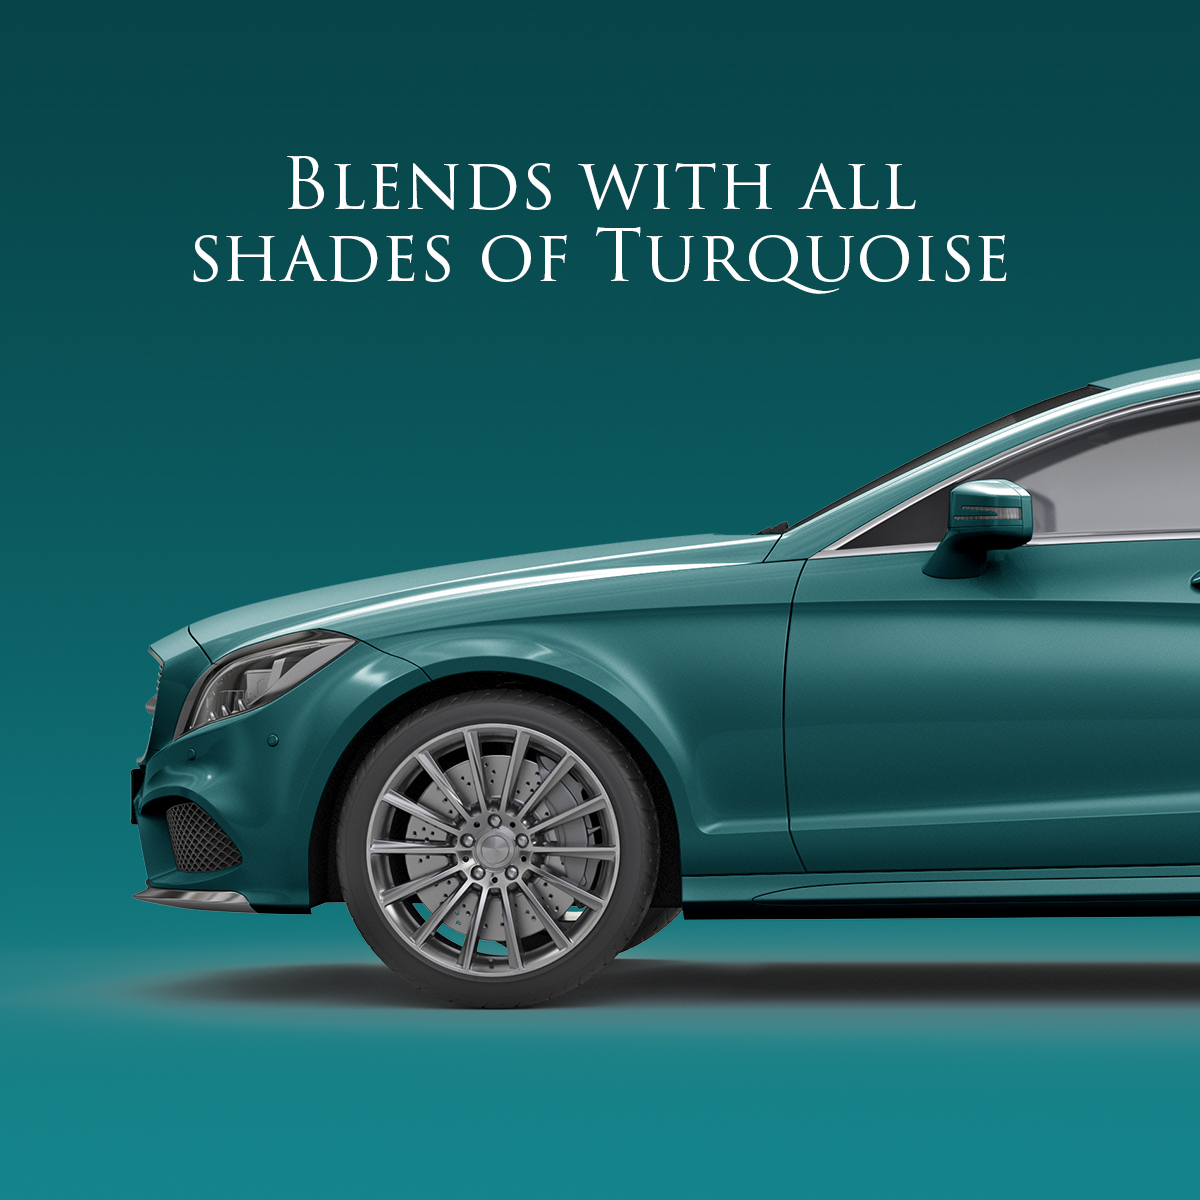 Blends with all shades of turquoise